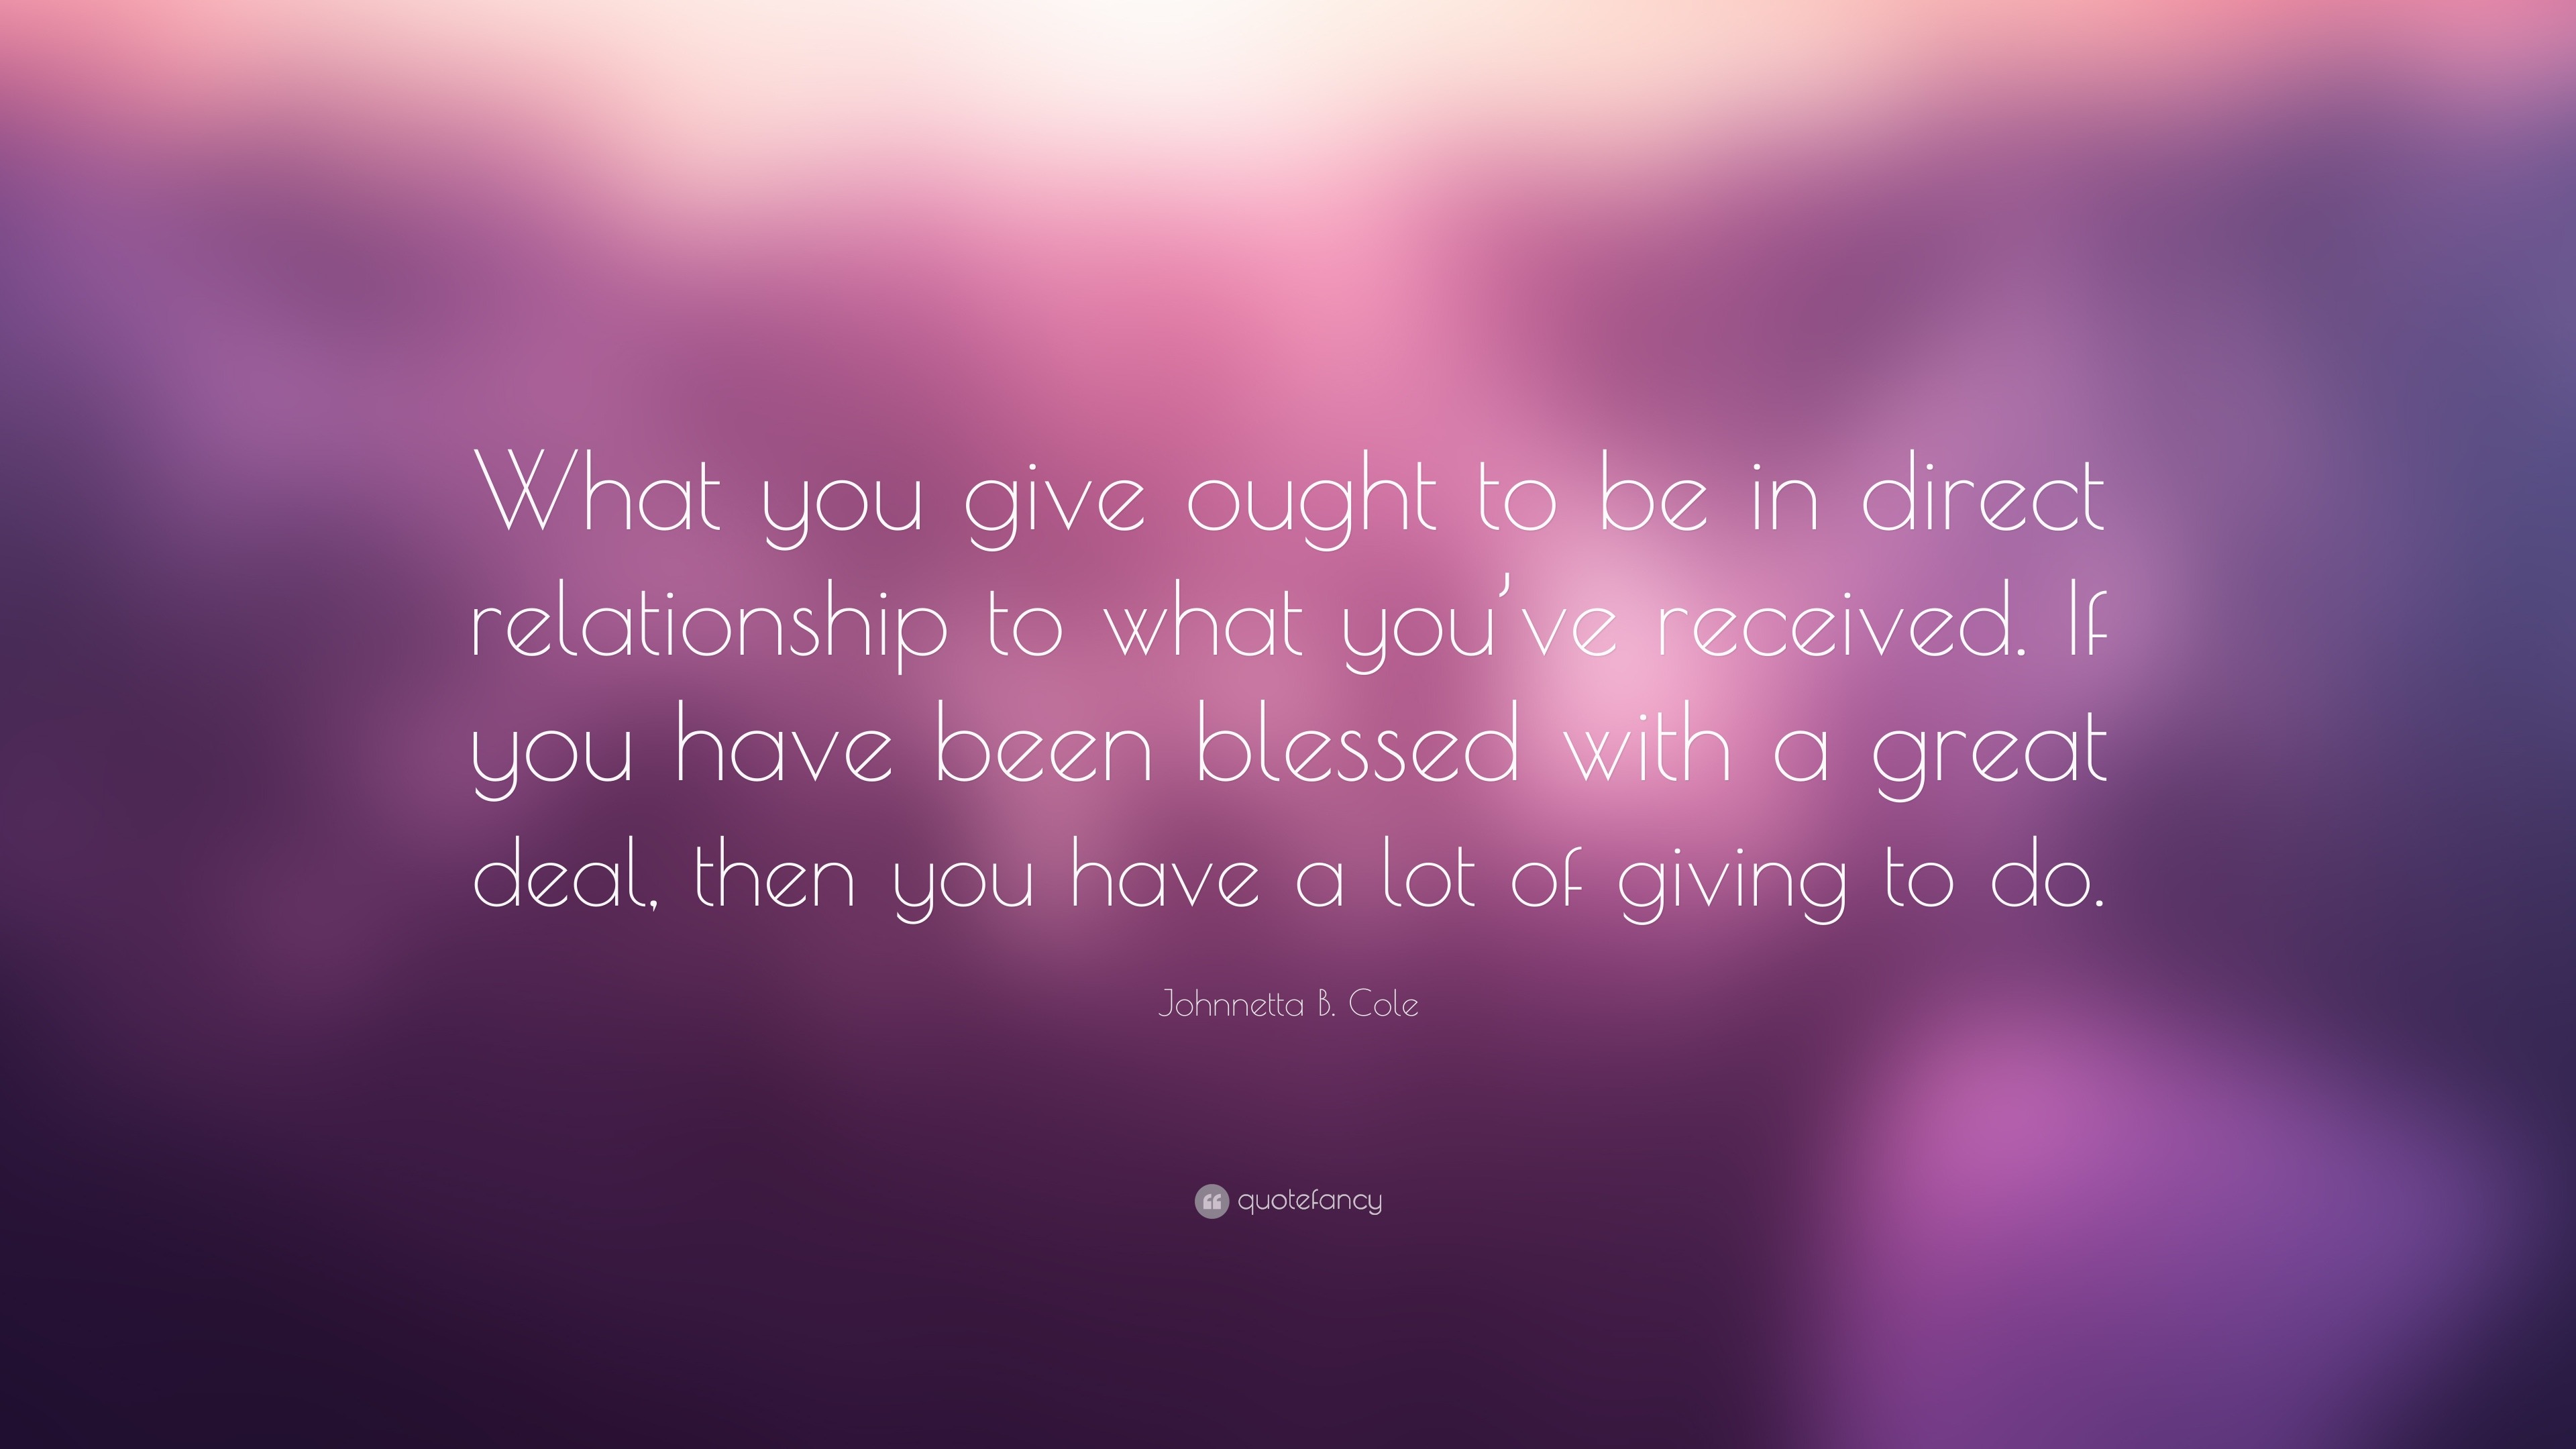 Johnnetta B. Cole Quote: “What you give ought to be in direct ...